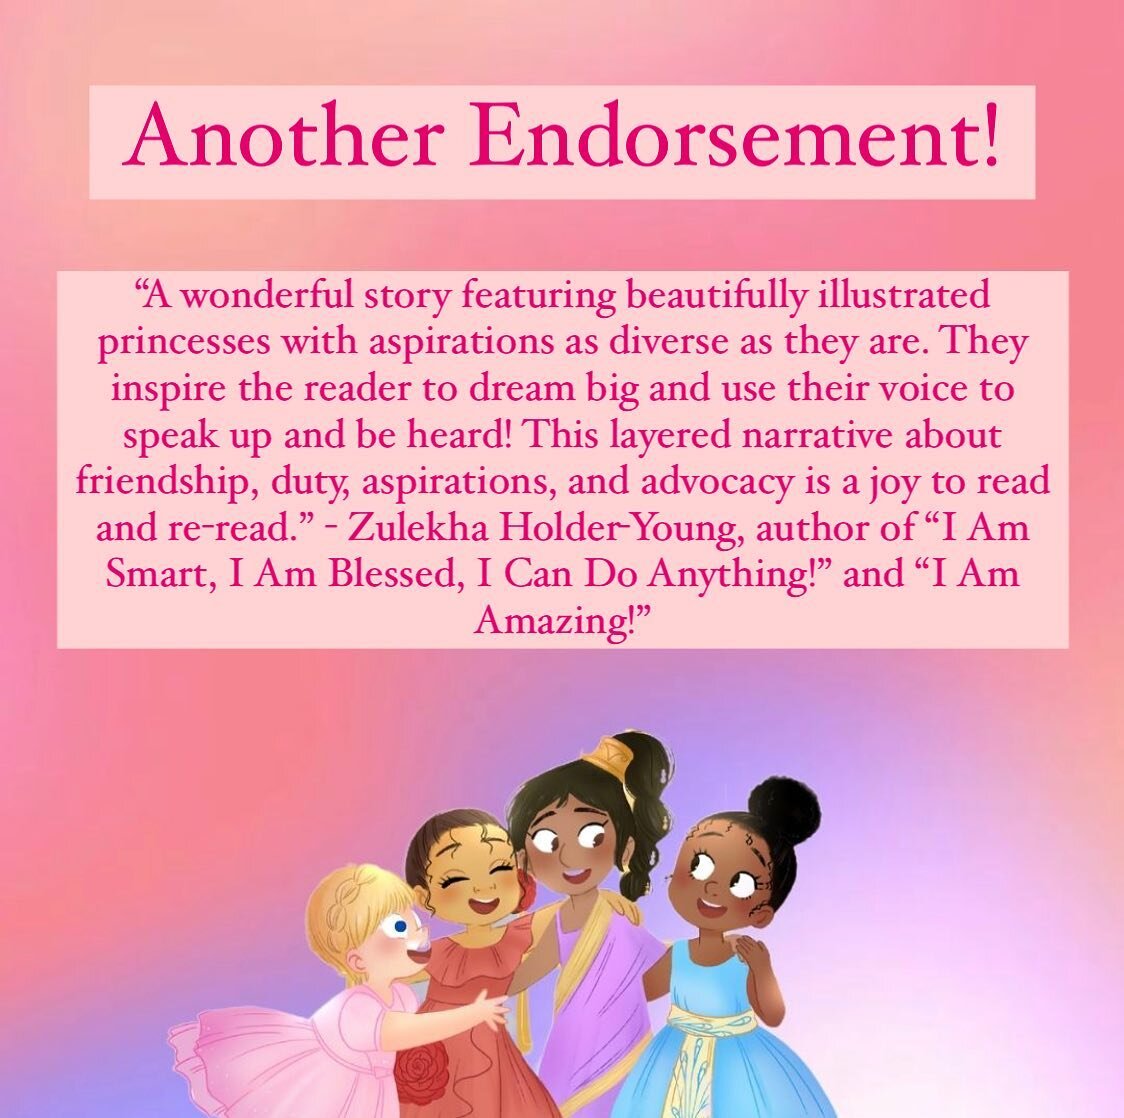 We&rsquo;re sharing one more endorsement before tomorrow&rsquo;s official launch date, this time from @amomdotcom, author of &ldquo;I Am Smart, I Am Blessed, I Can Do Anything!&rdquo; and &ldquo;I Am Amazing!&rdquo;
📣
&ldquo;A wonderful story featur